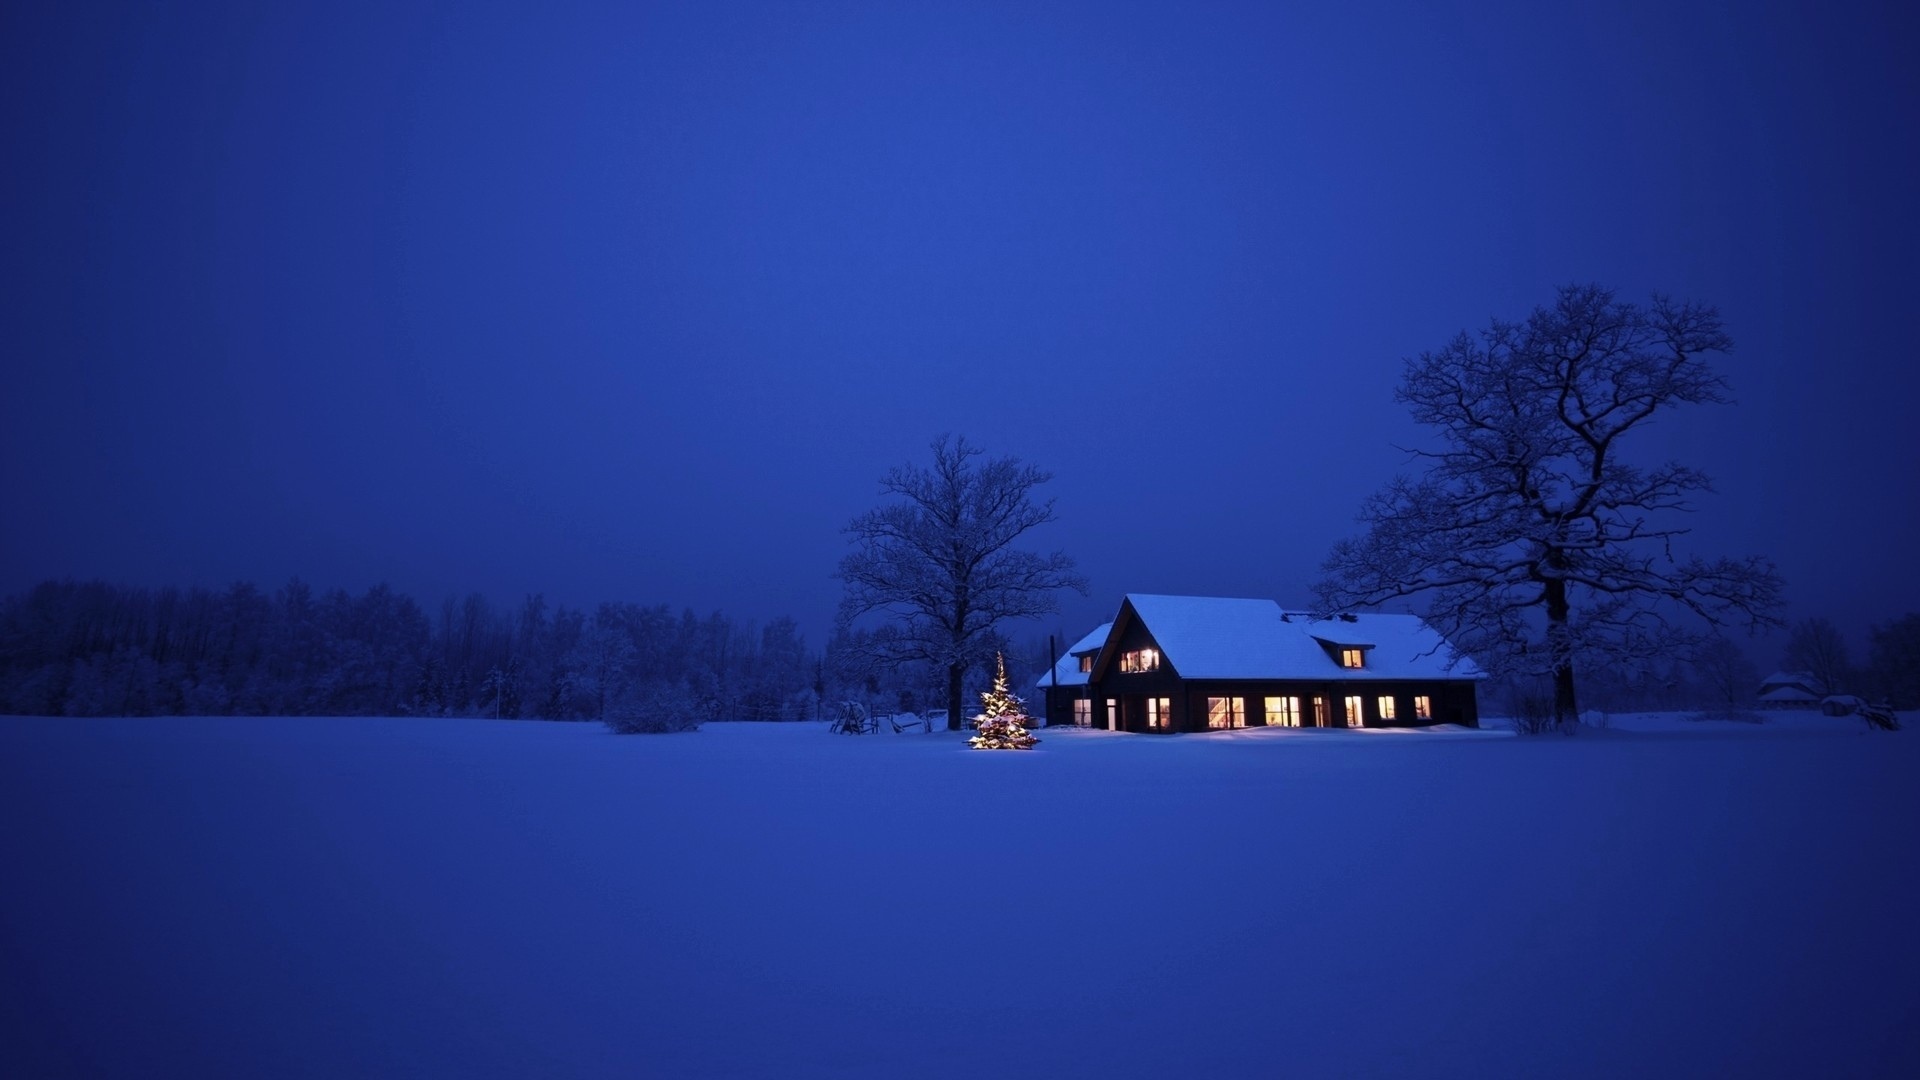 vertical wallpaper snow, houses, christmas xmas, new year, landscape, holidays, winter, blue